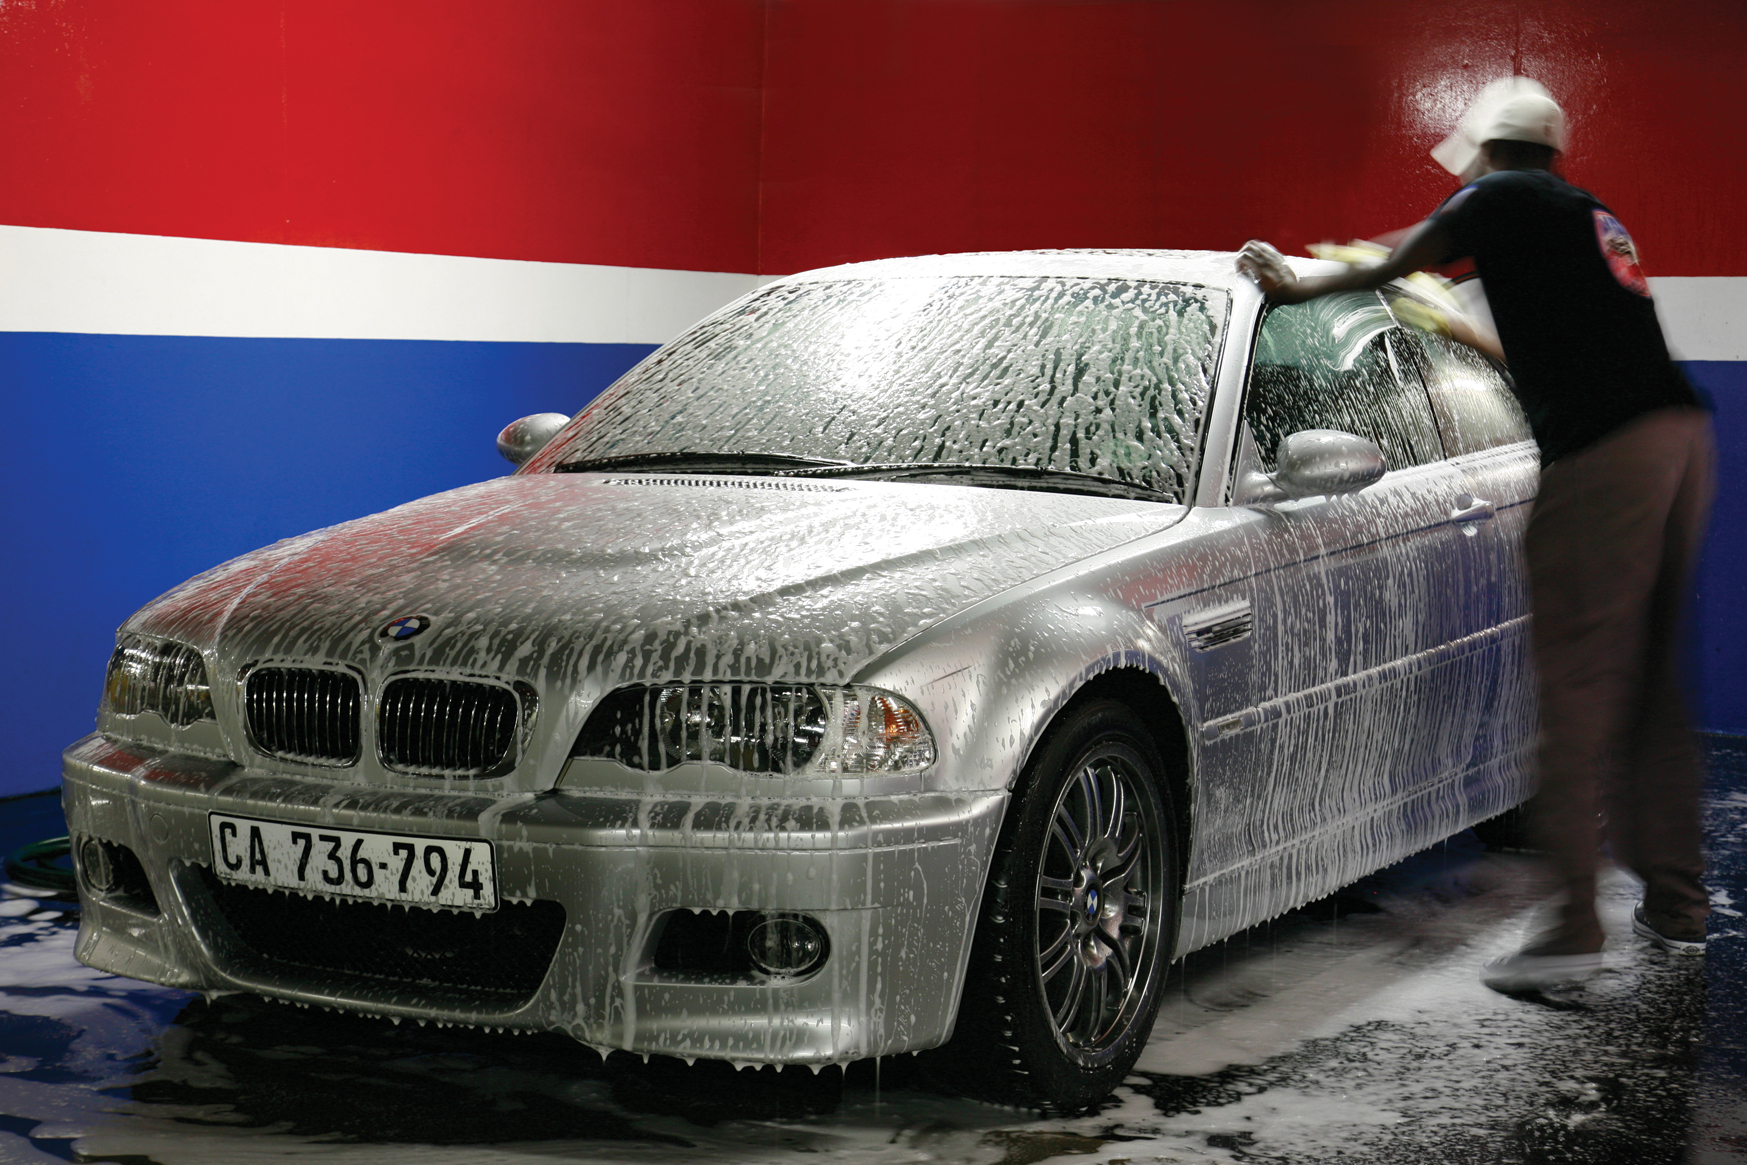 E46 BMW M3 – Professionally Cleaning